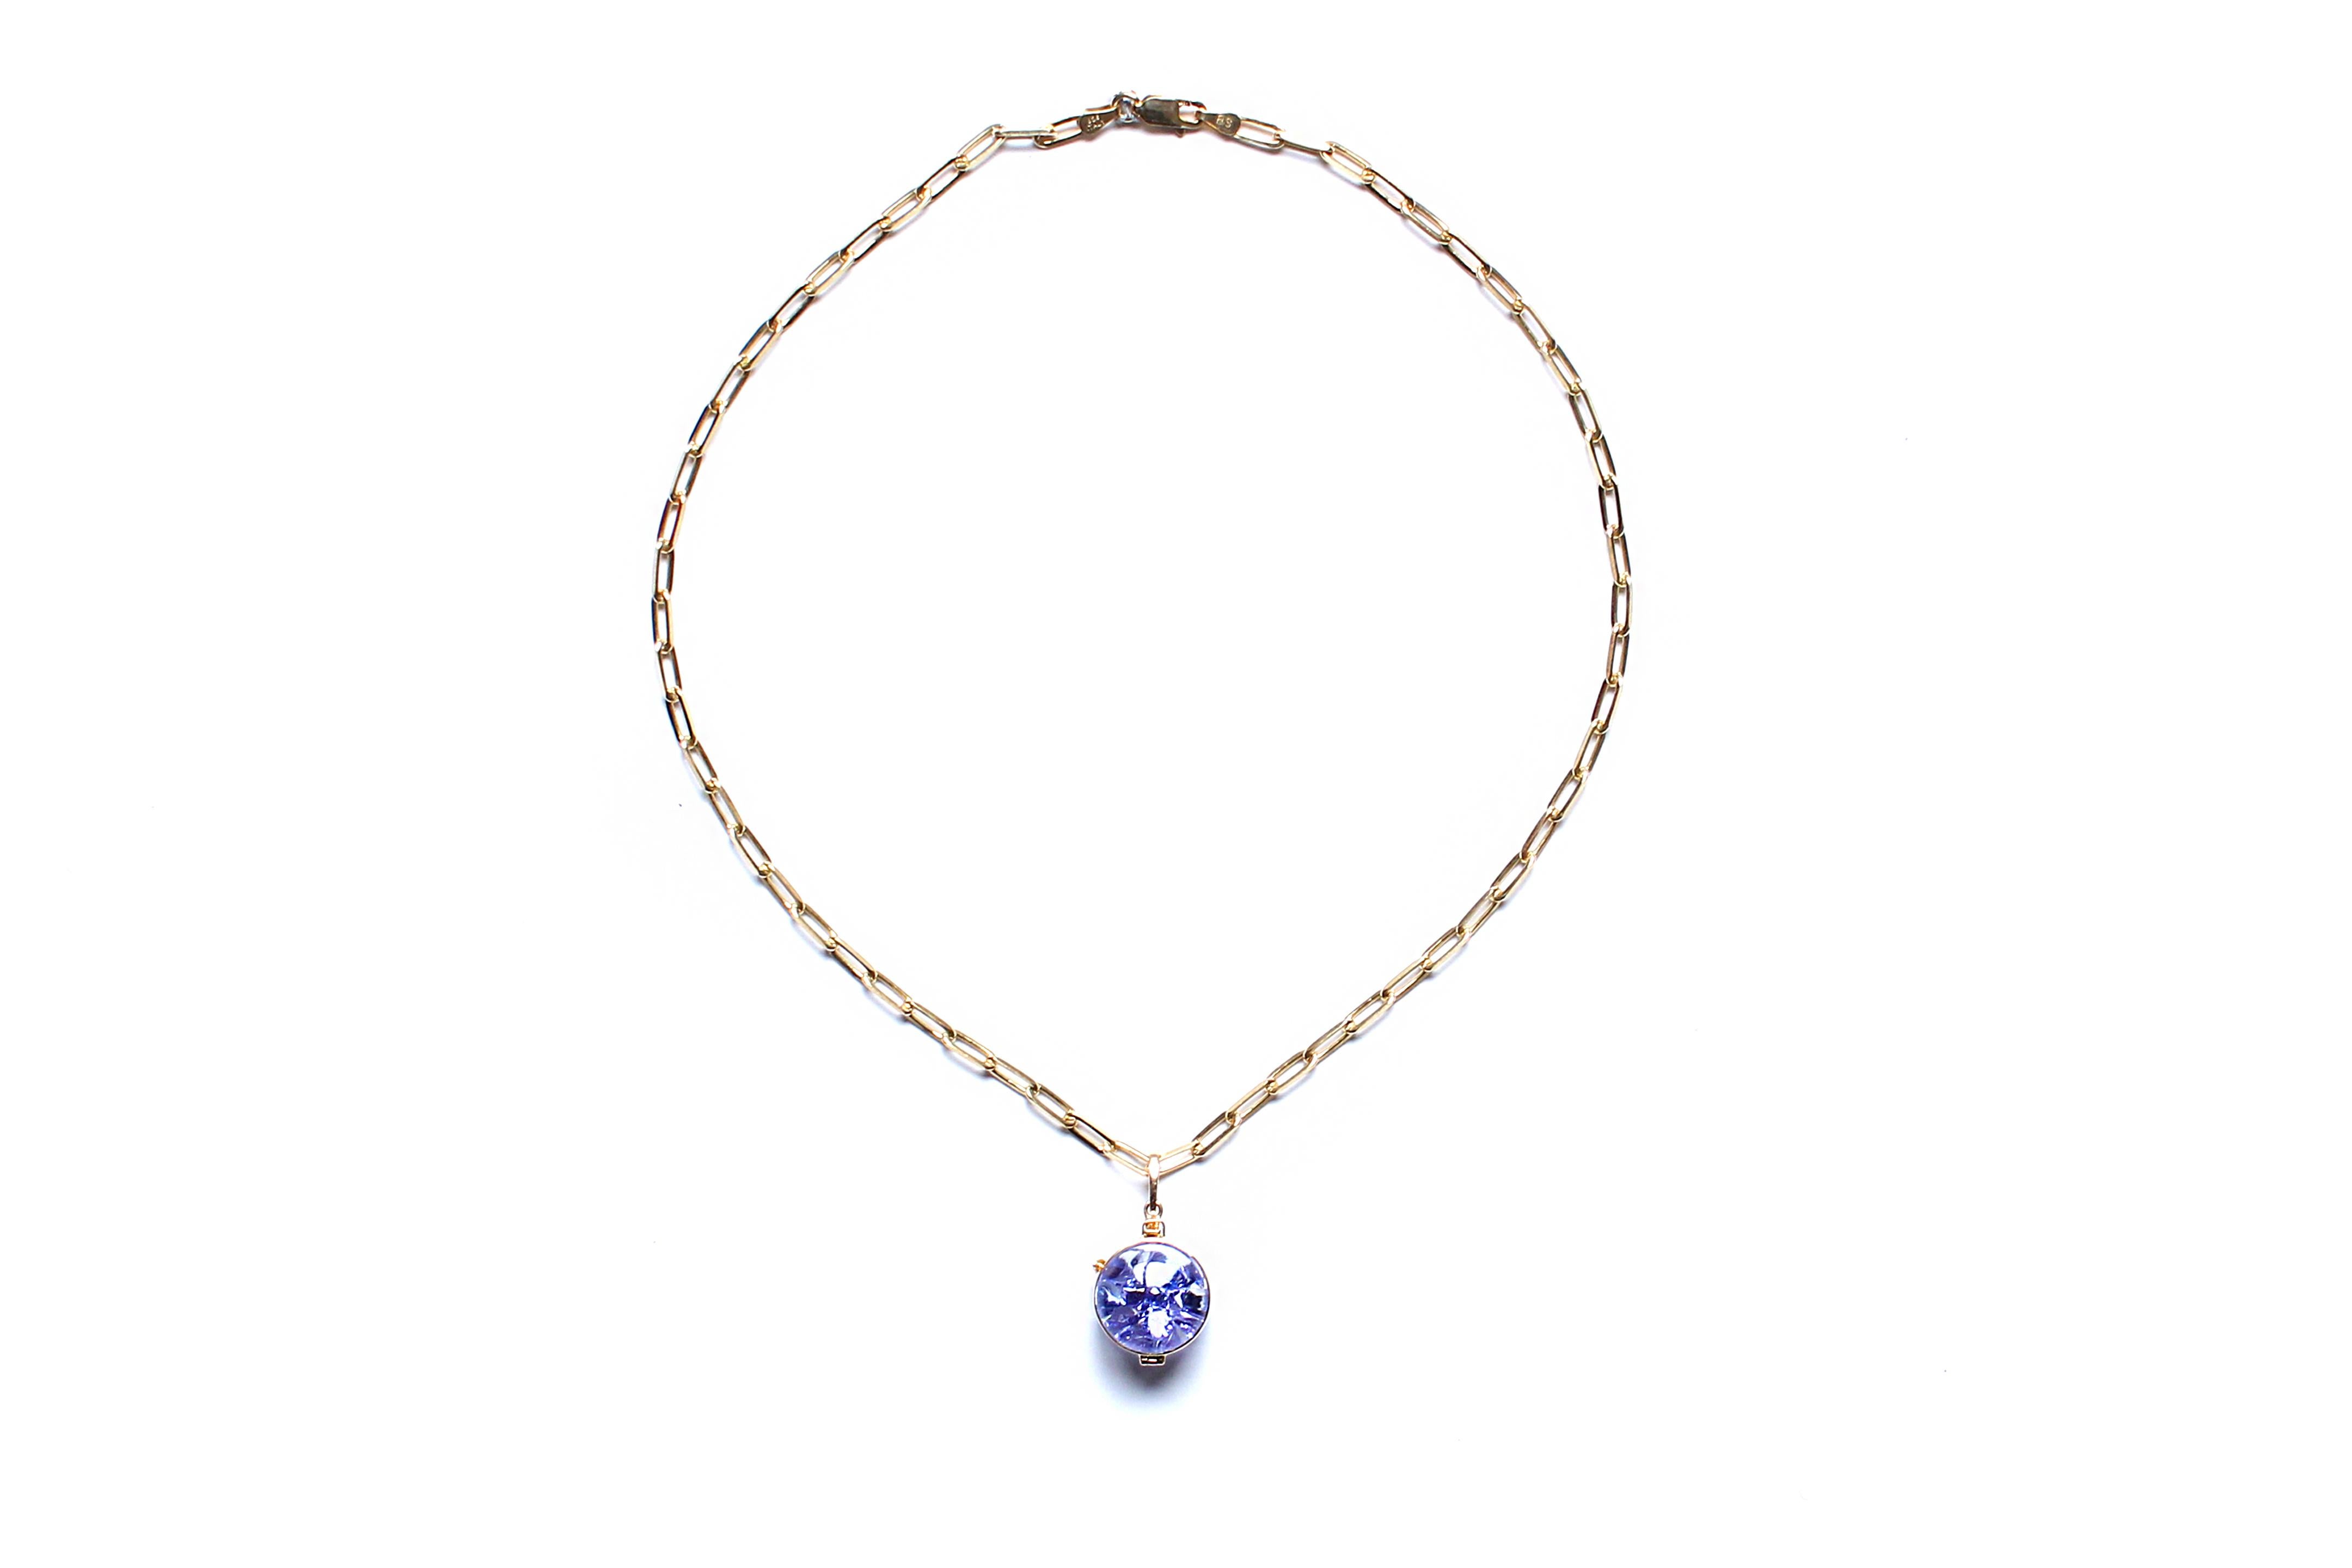 Contemporary Clarissa Bronfman Tanzanite Shaker Pendant 14k Gold PaperclipLink Chain Necklace For Sale